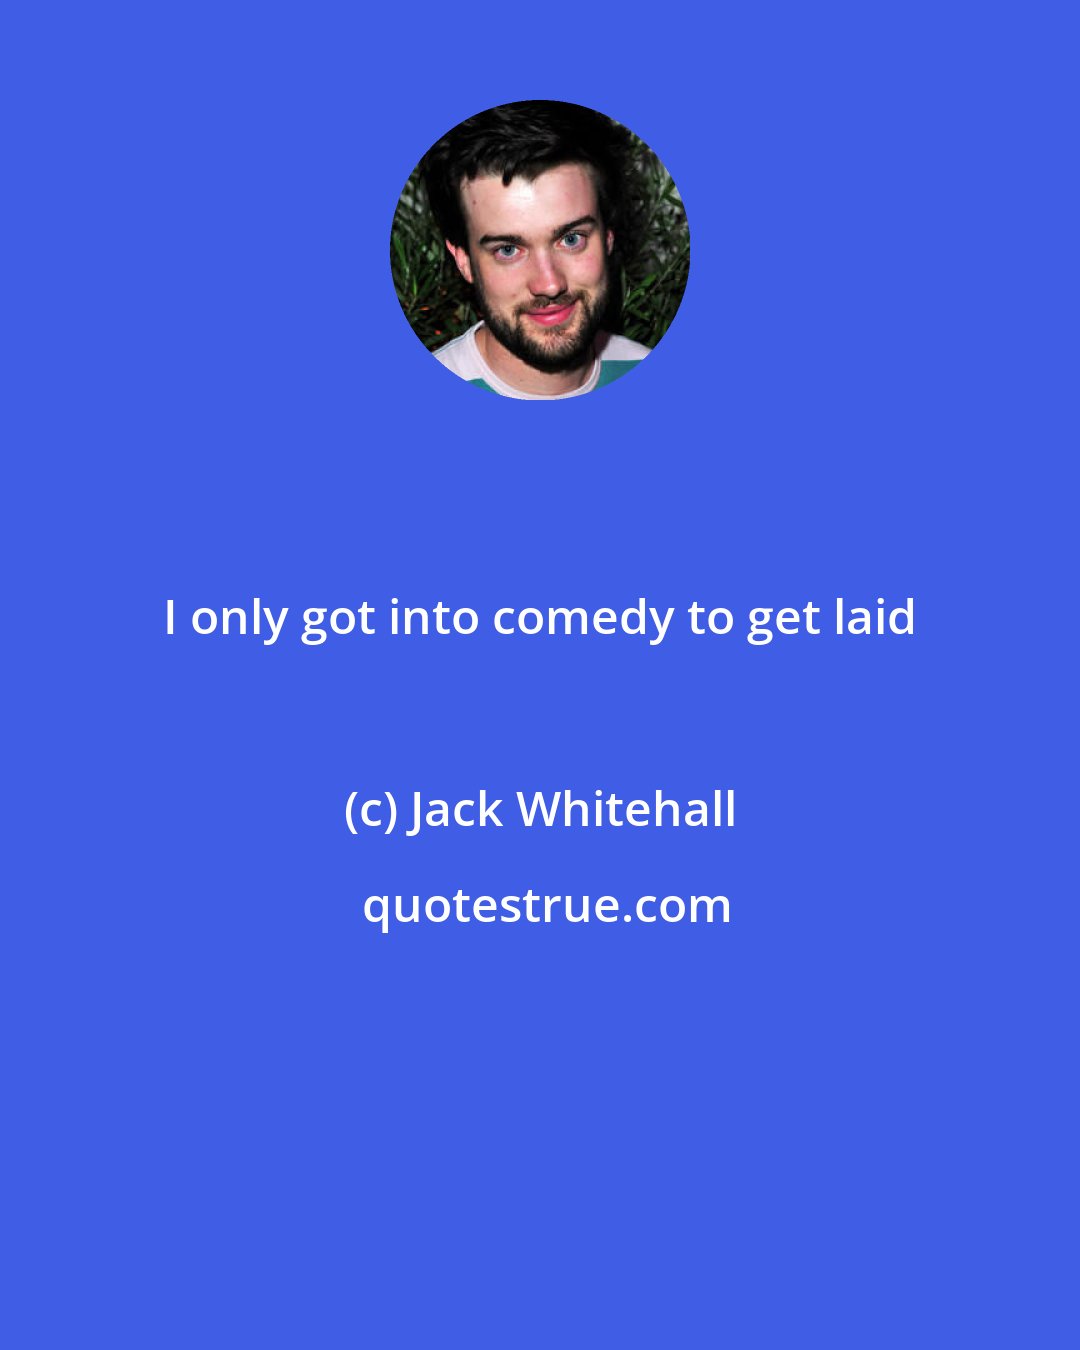 Jack Whitehall: I only got into comedy to get laid